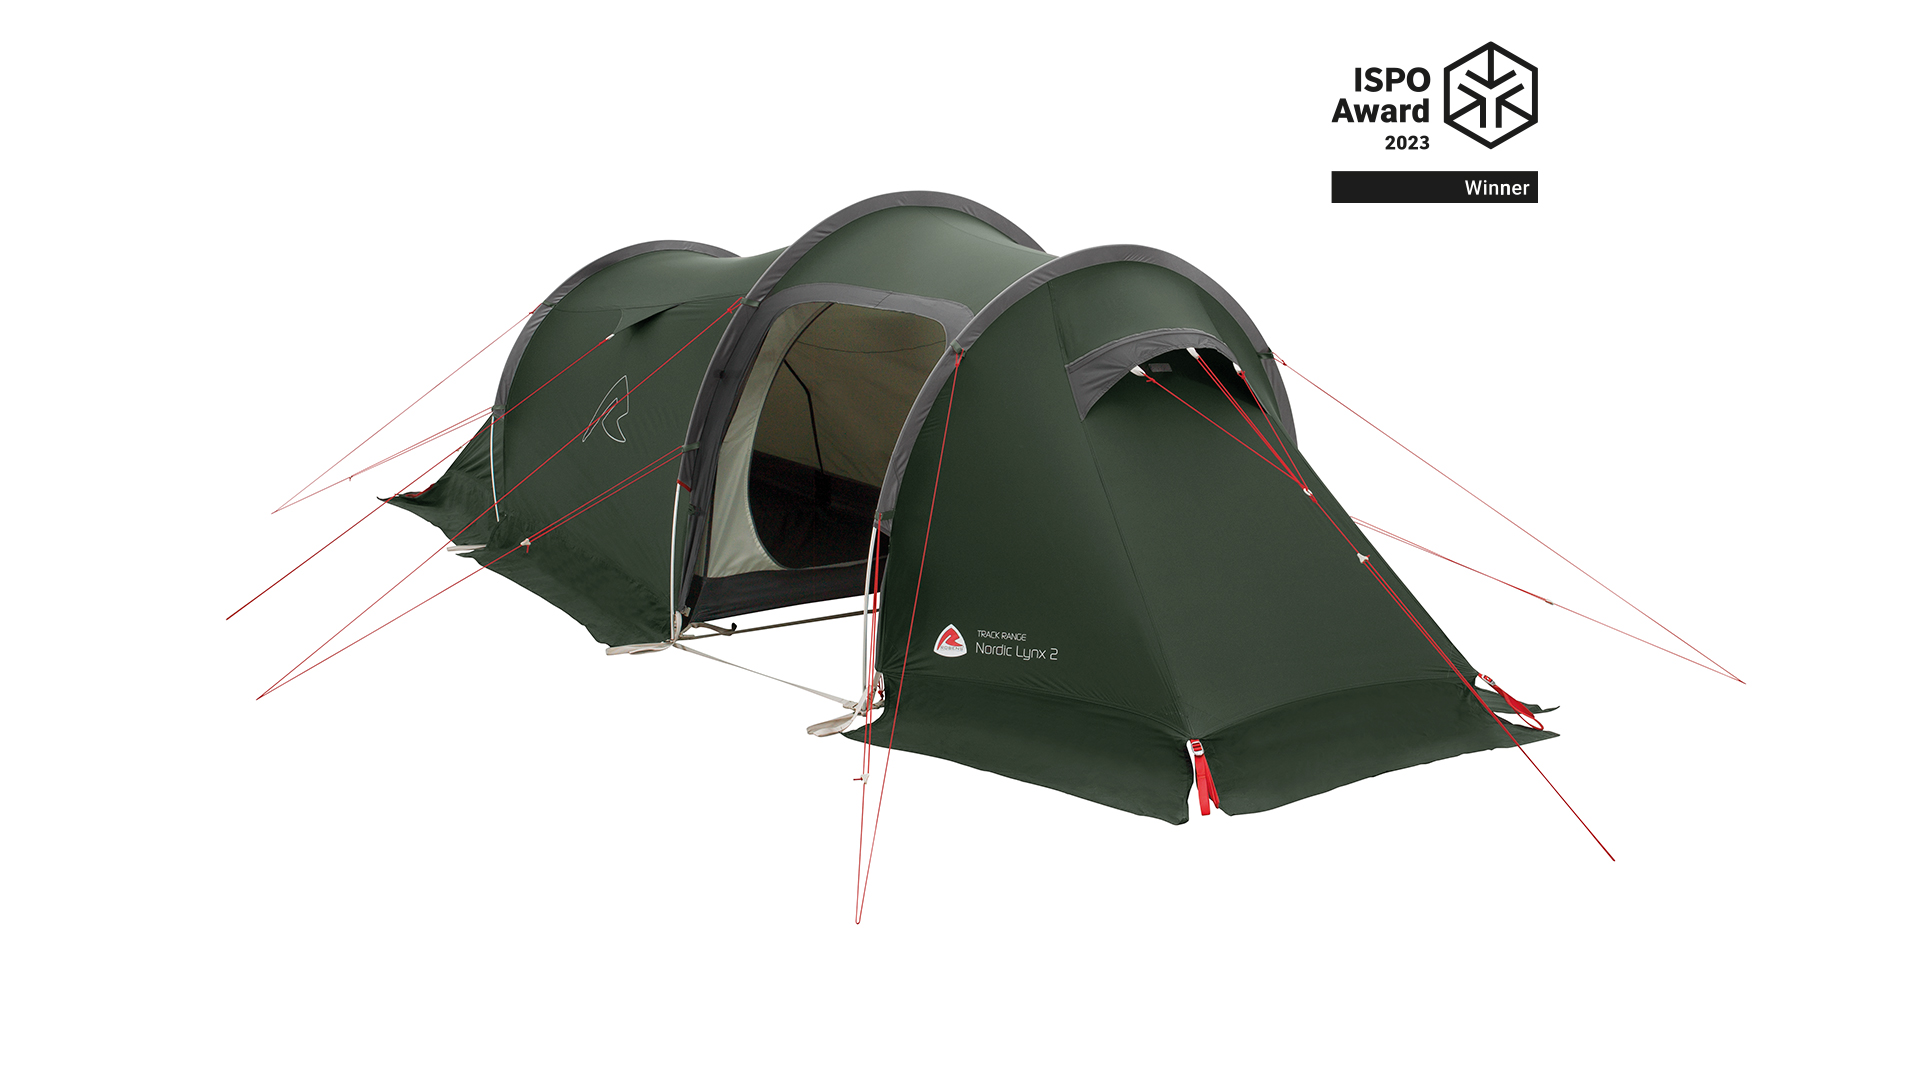 The Nordic Lynx expedition tent by Robens the ISPO Award